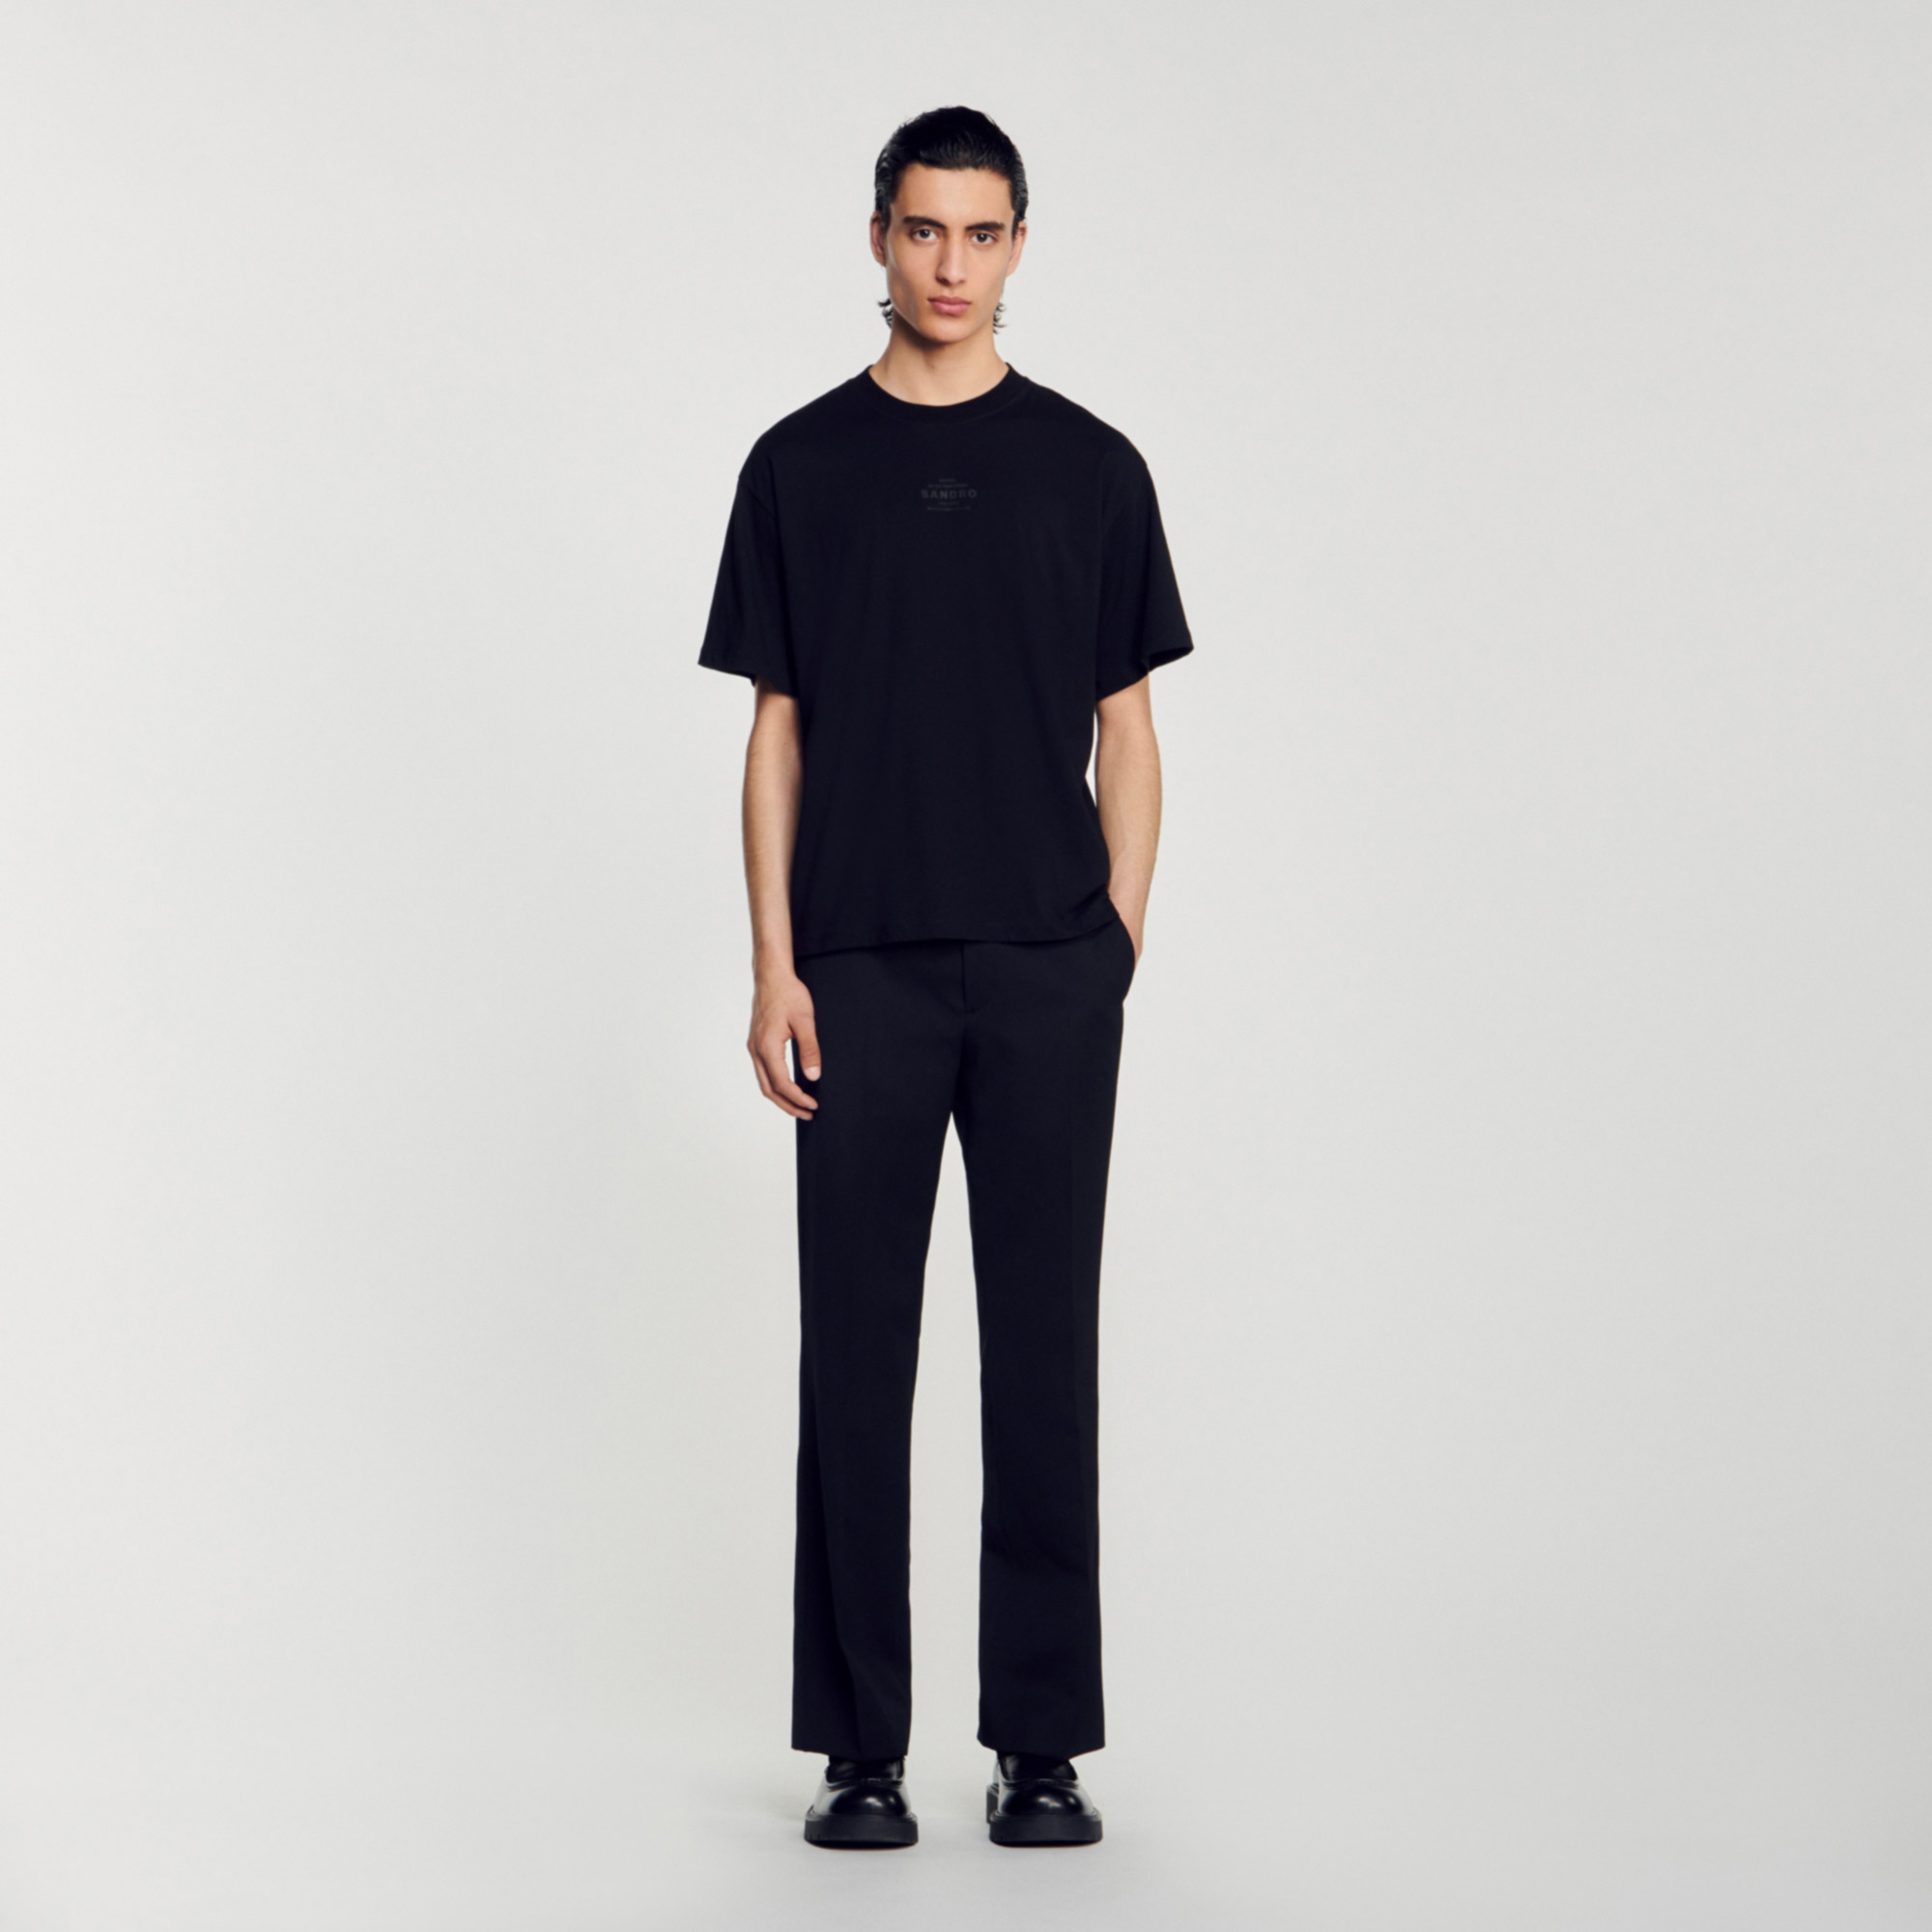 Sandro cotton Rib: Oversized T-shirt with a round neck, short sleeves and a rubber Sandro logo on the front